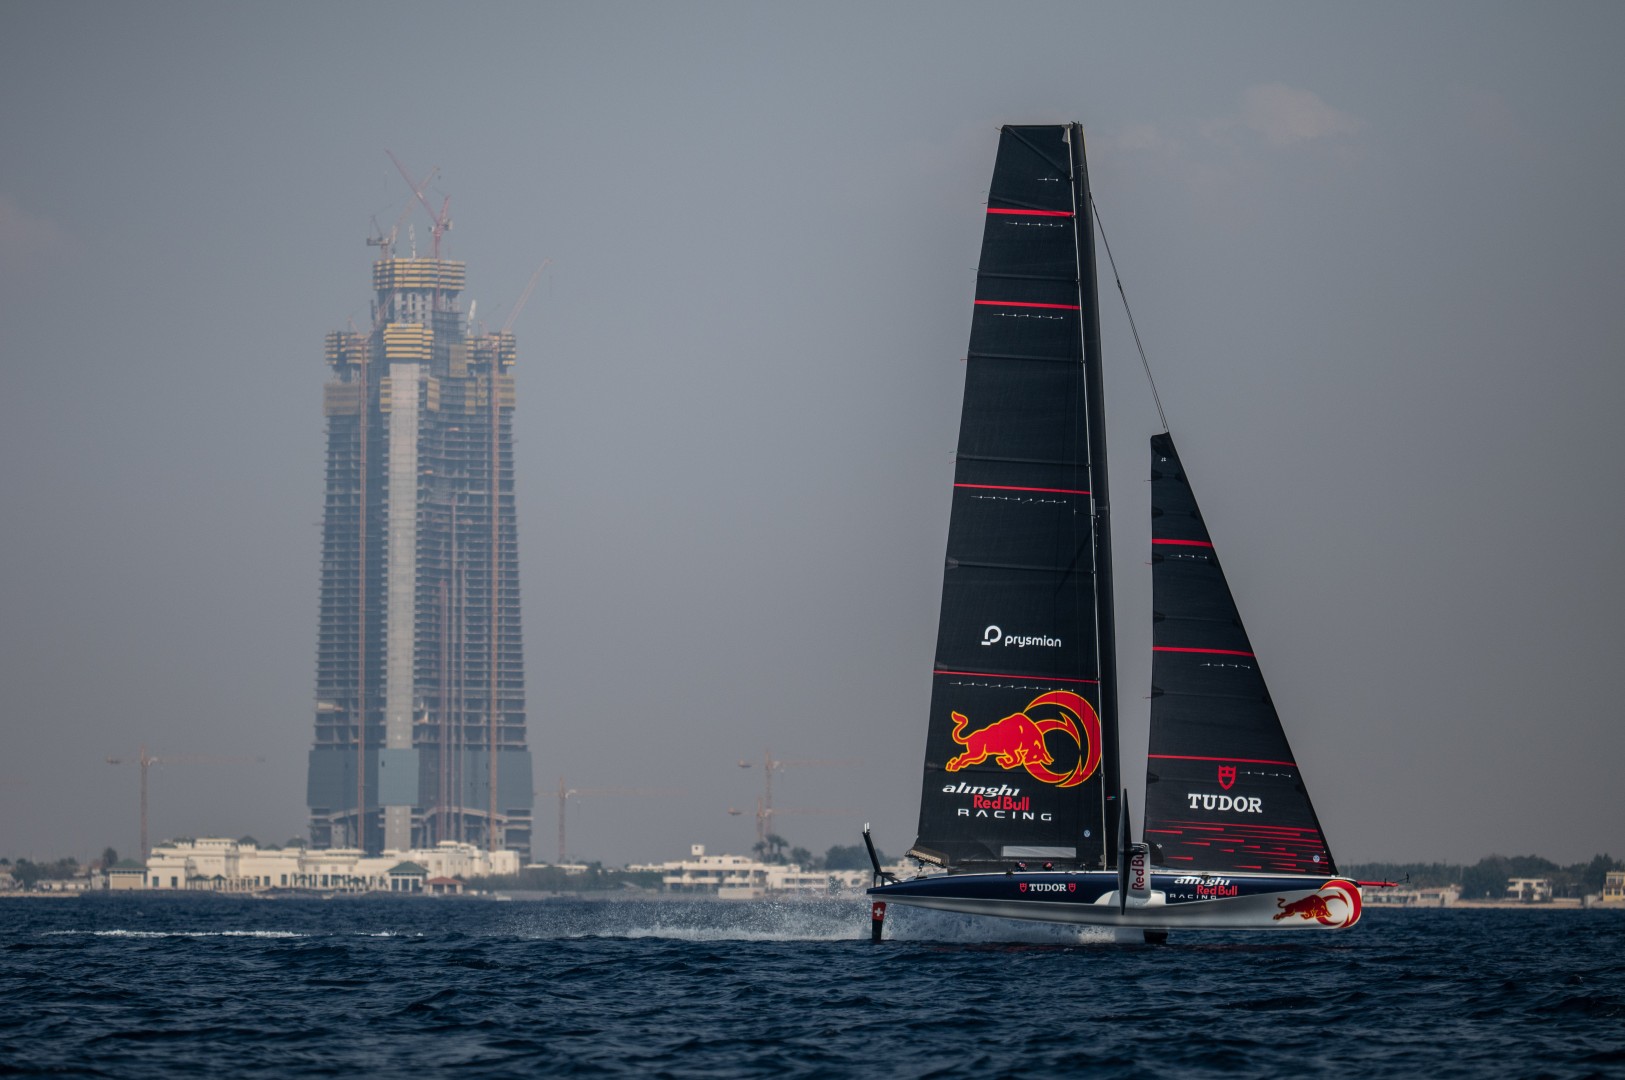 America’s Cup: all systems go in Jeddah